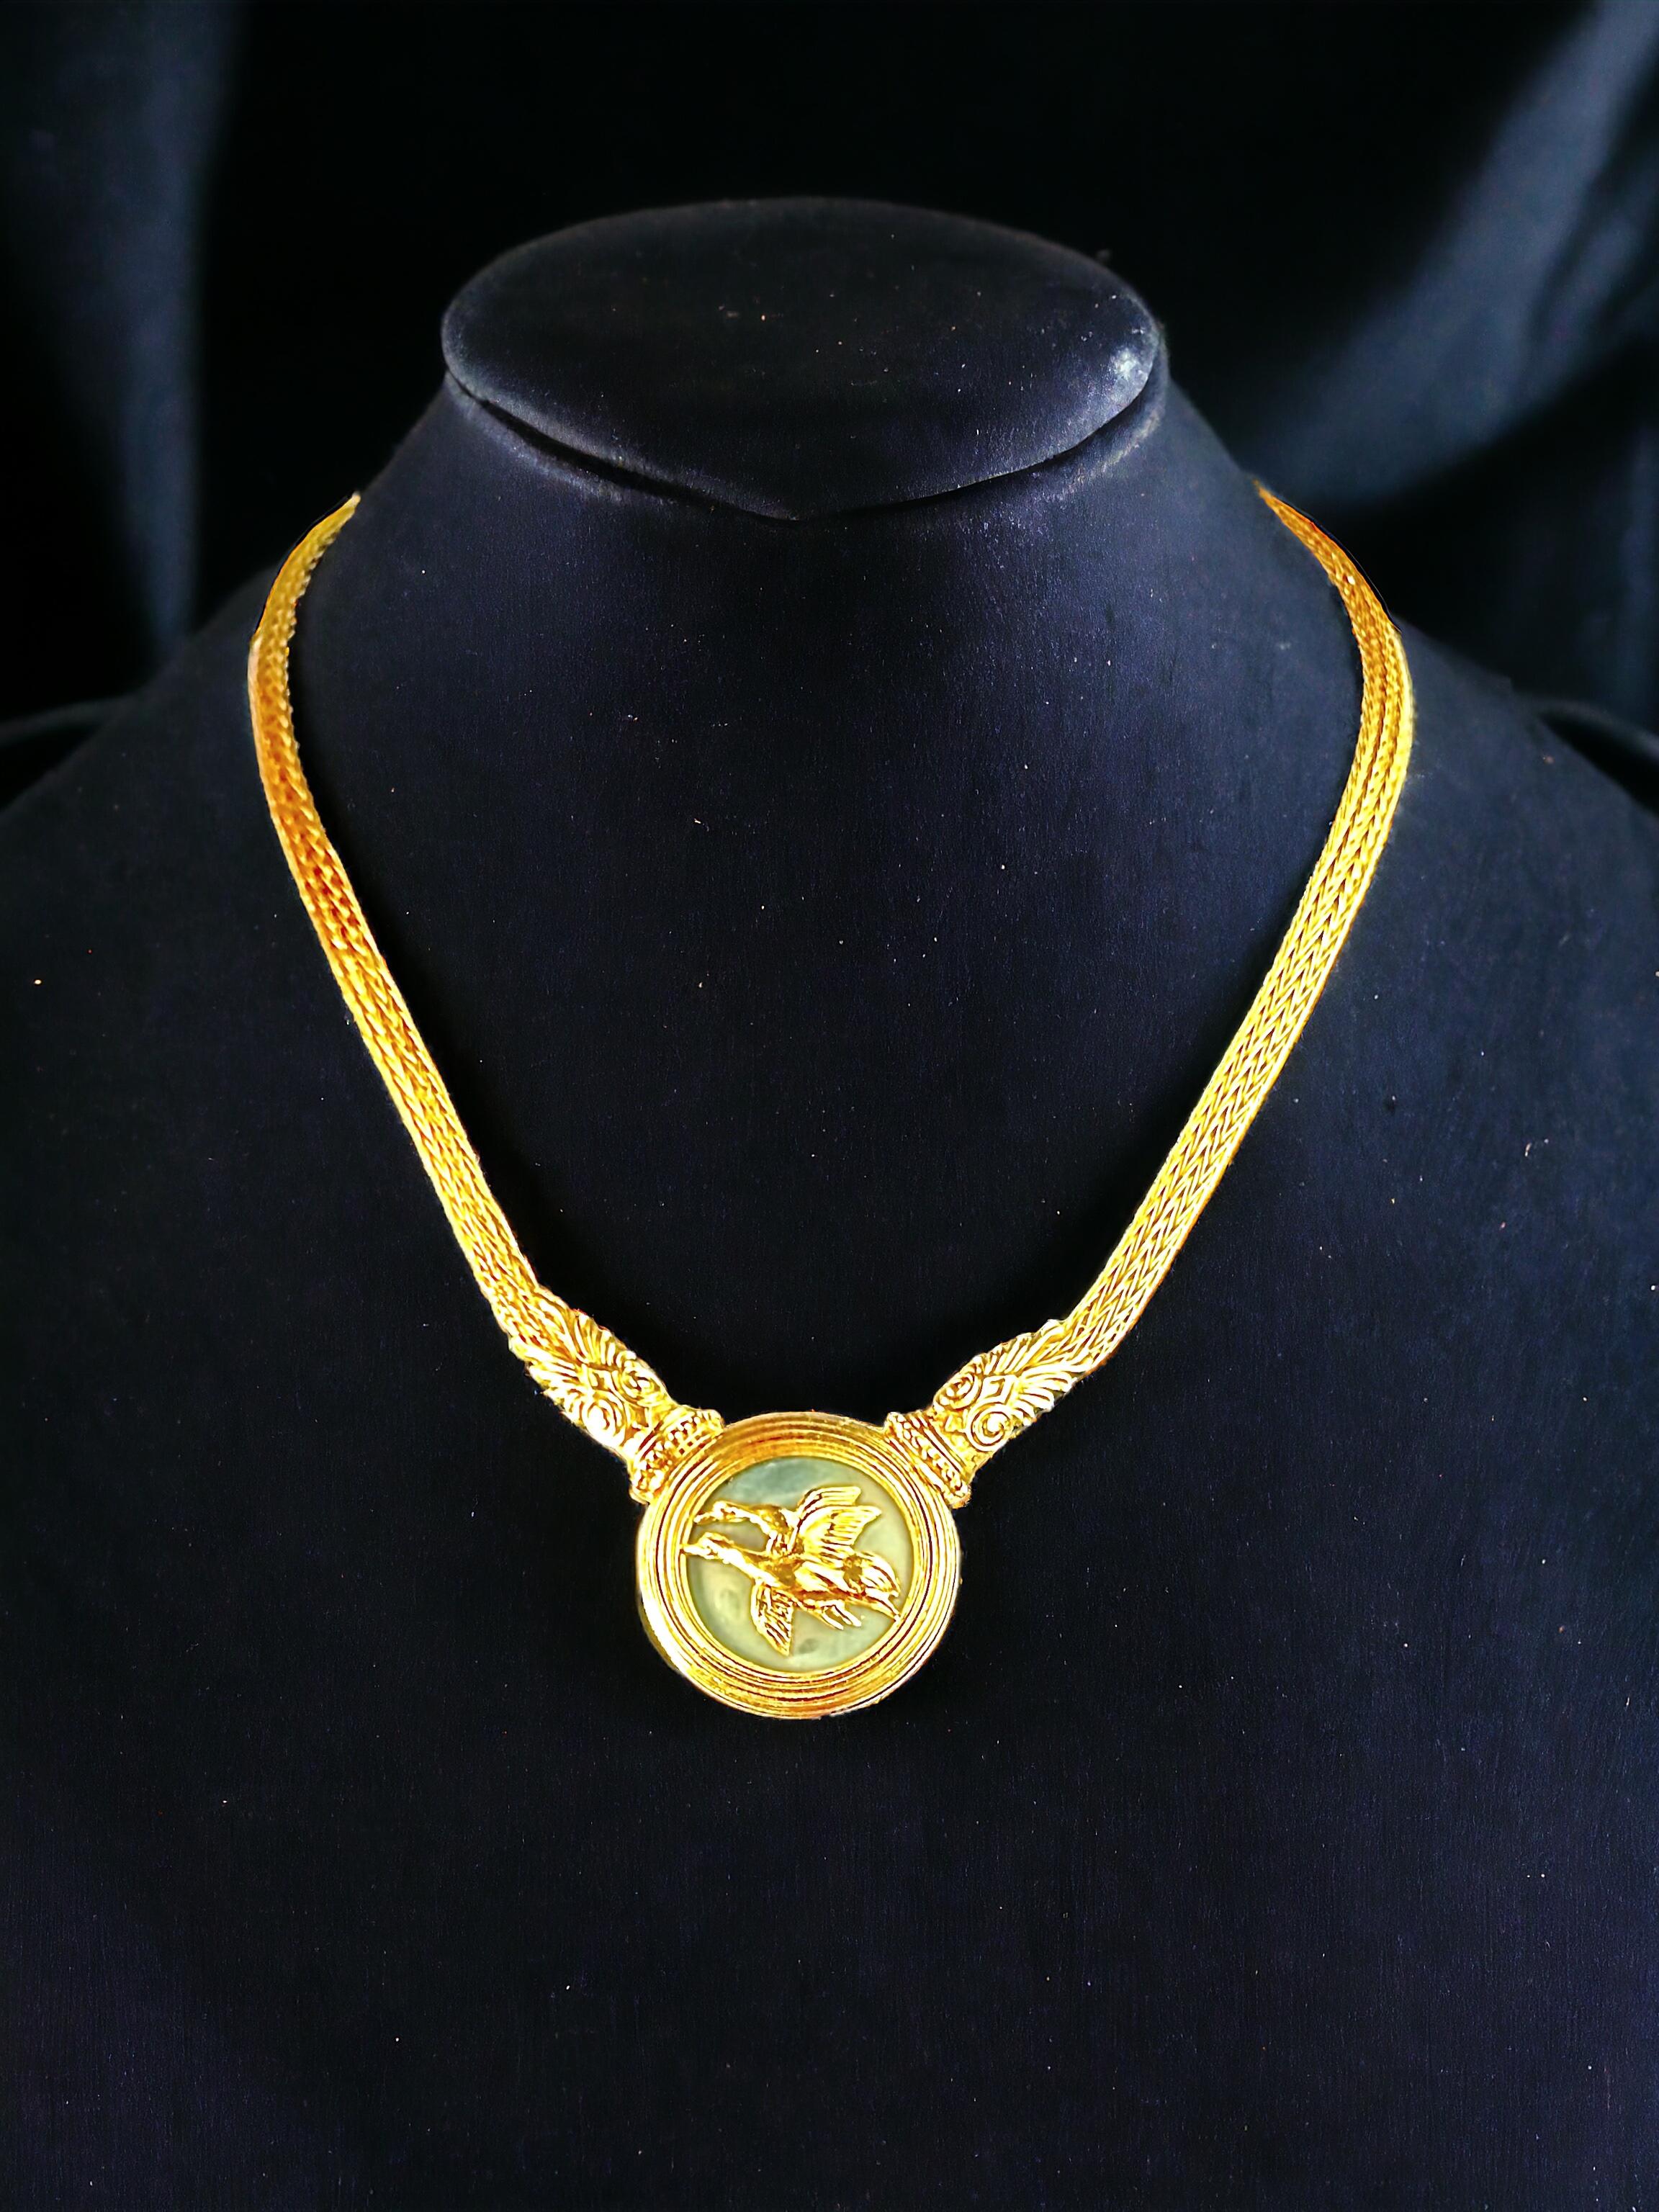 Rare Vintage necklace by  Illias Lalaounis. Masterfully crafted in the finest 18K yellow gold, this piece embodies the timeless artistry of Greek jewelry making.

The necklace’s weight of 49 grams attests to its substantial quality and the intricate